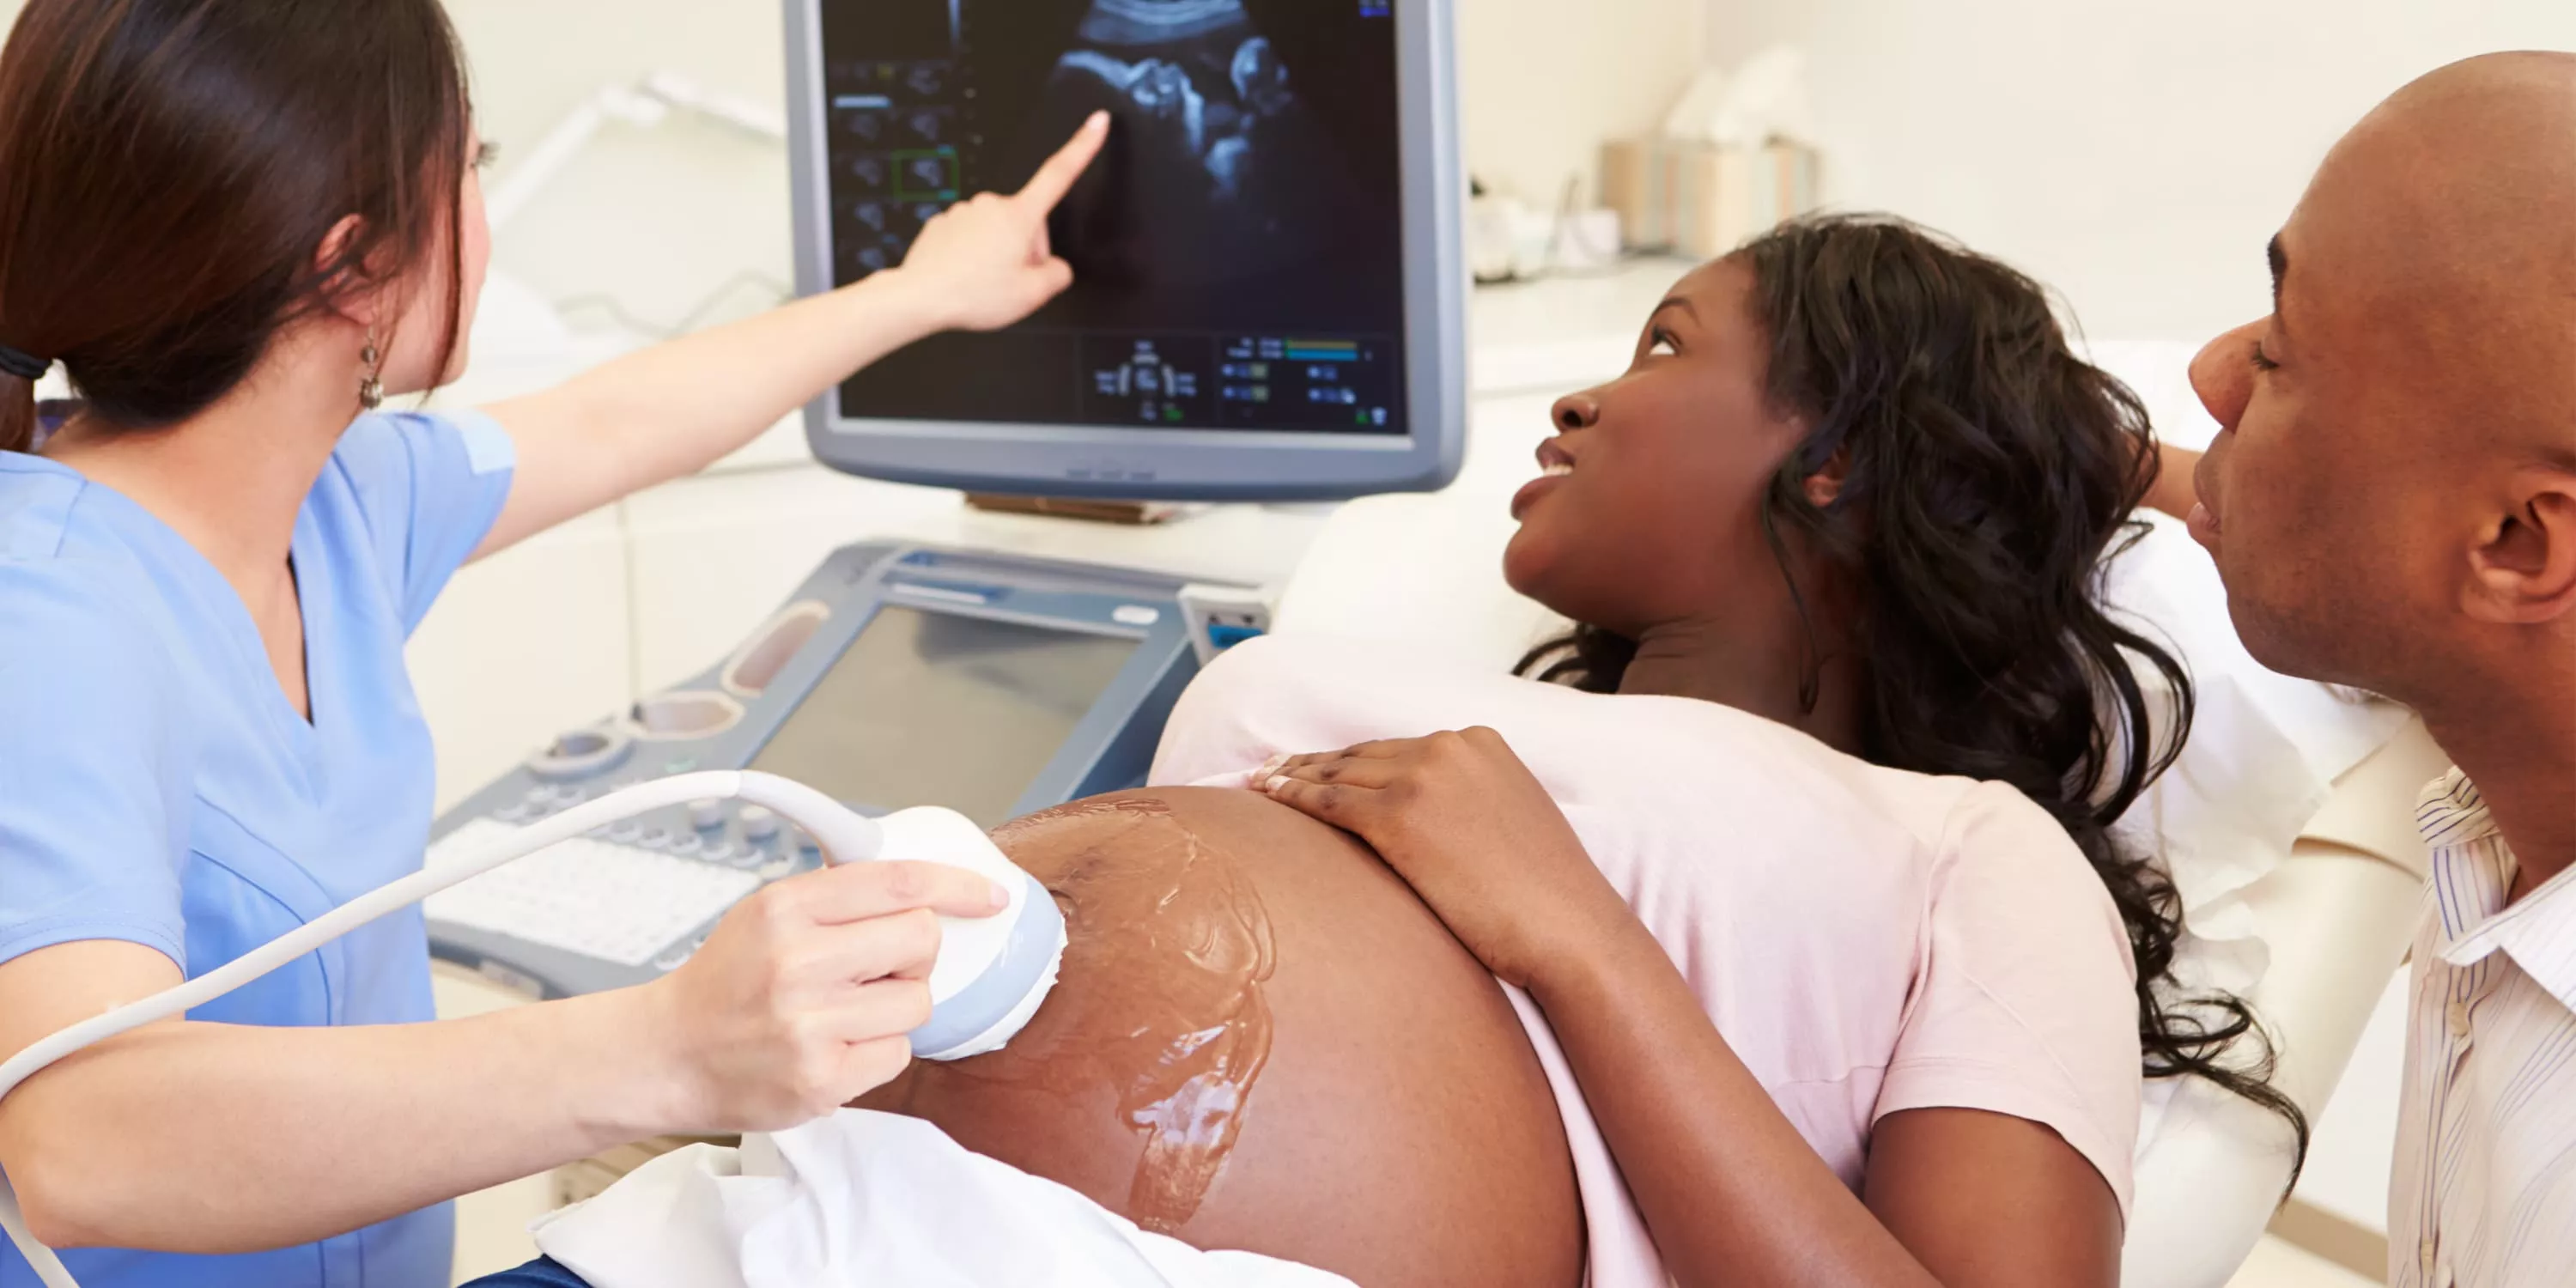 Pregnant woman with partner at an ultrasound examination